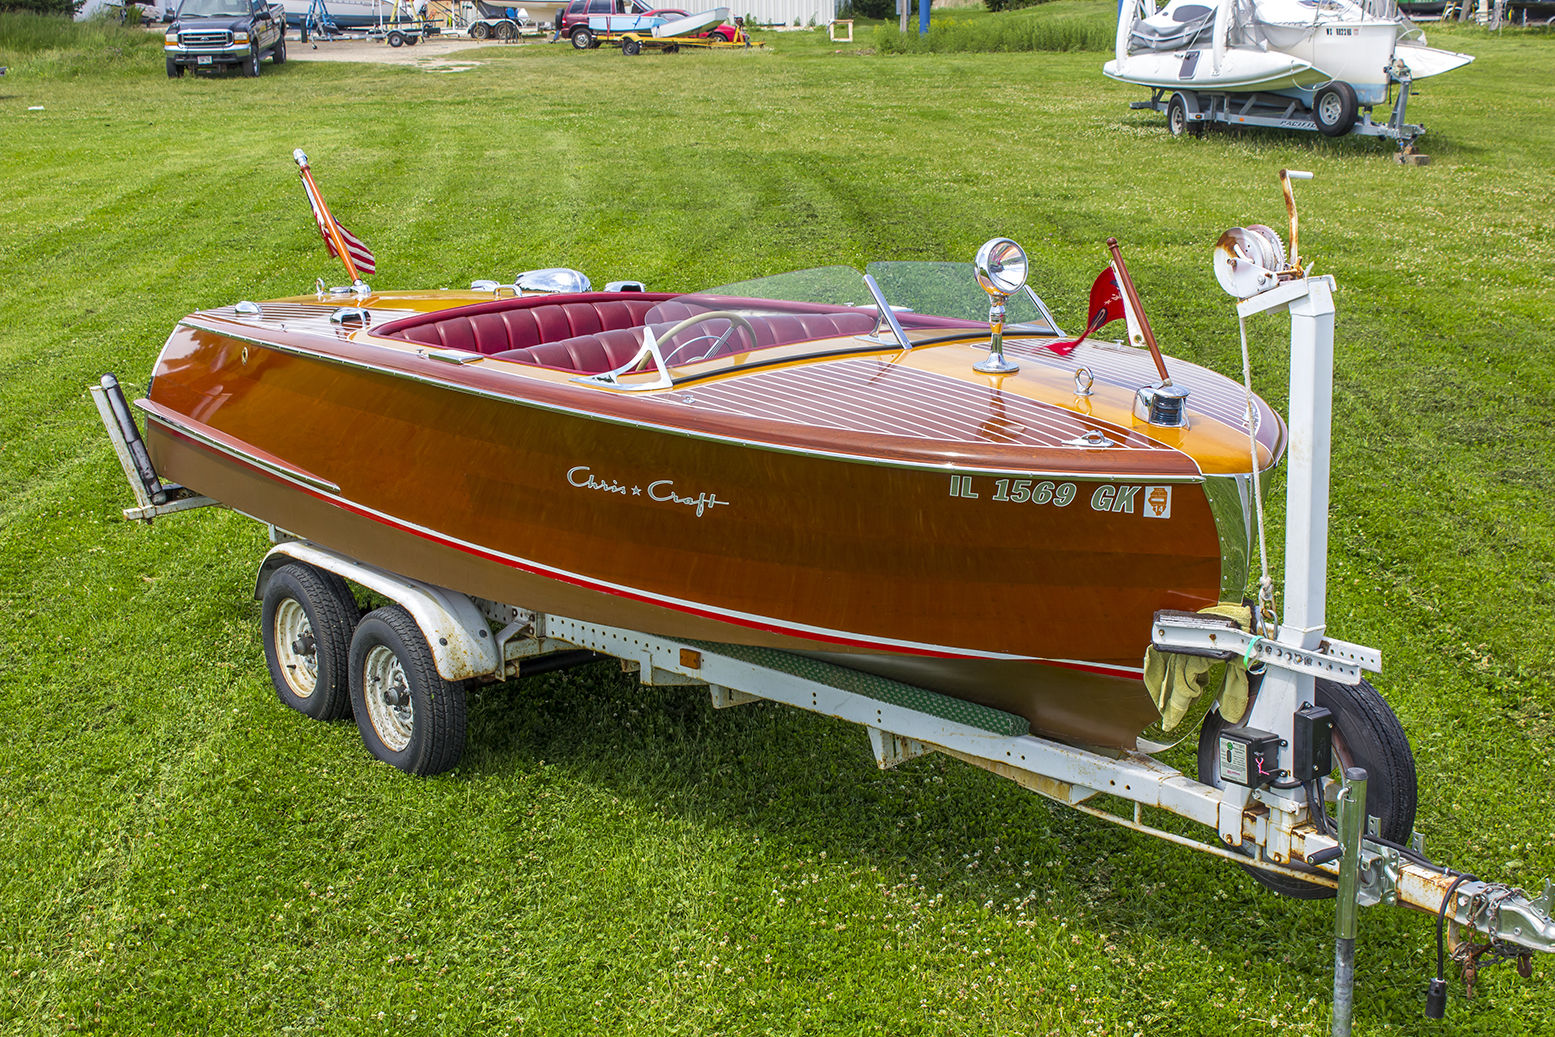 chris craft riviera 1950 for sale for ,900 - boats-from